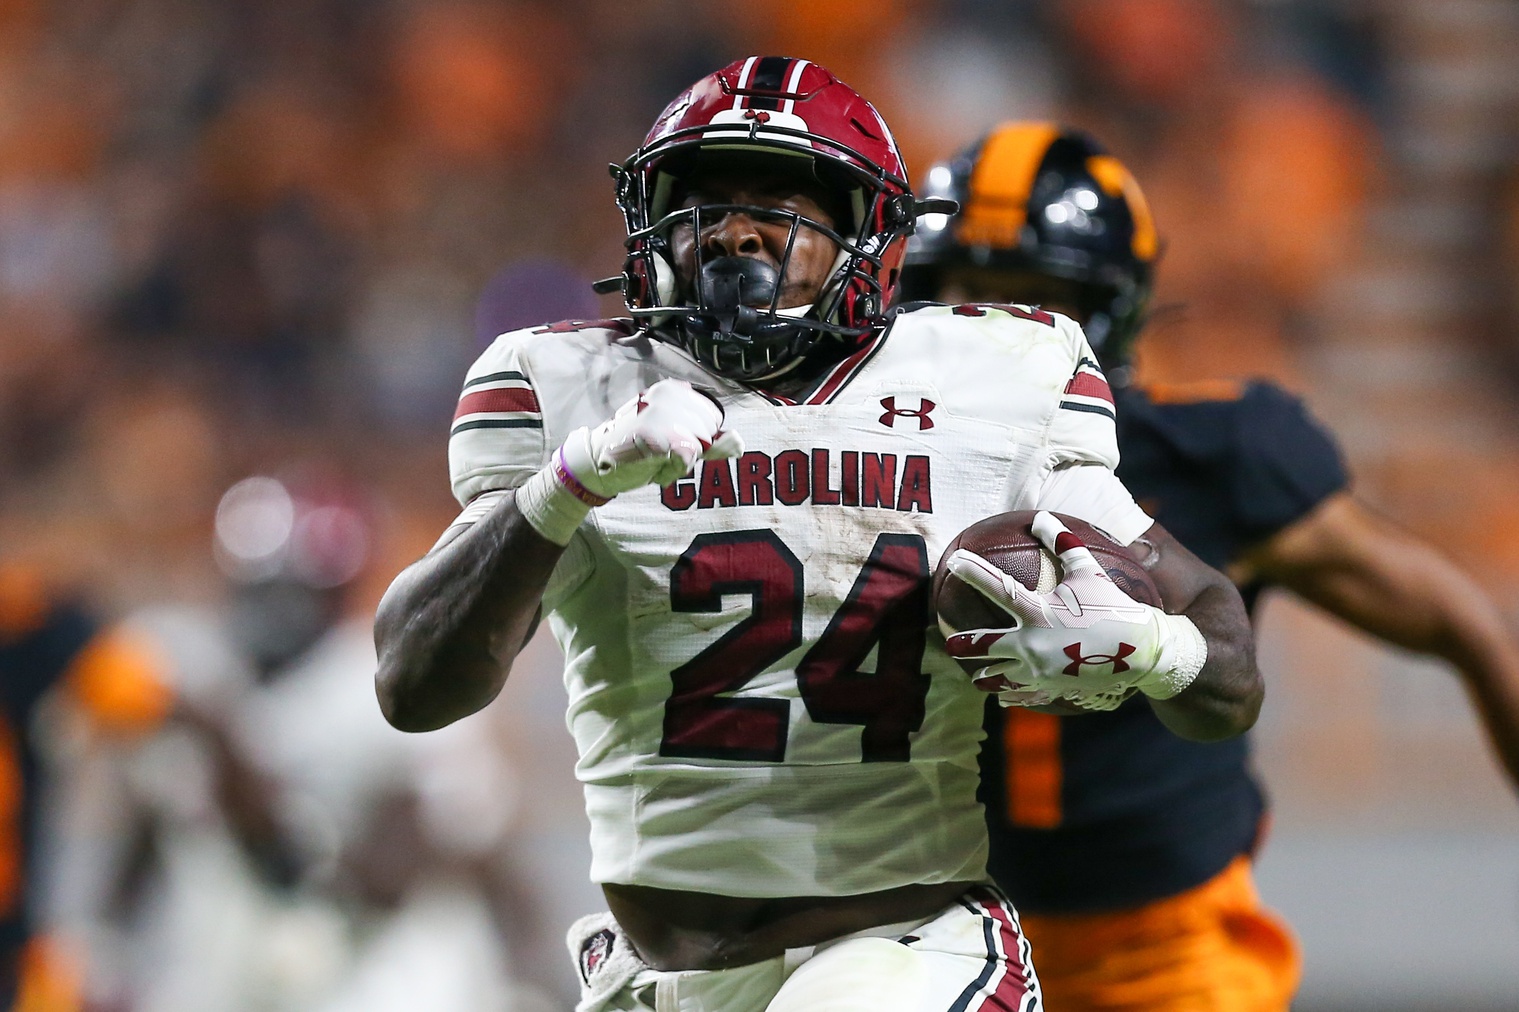 South Carolina matches up with Florida on Saturday. Before diving into the Gamecocks, Florida's Strengths and Weaknesses deserve a look.